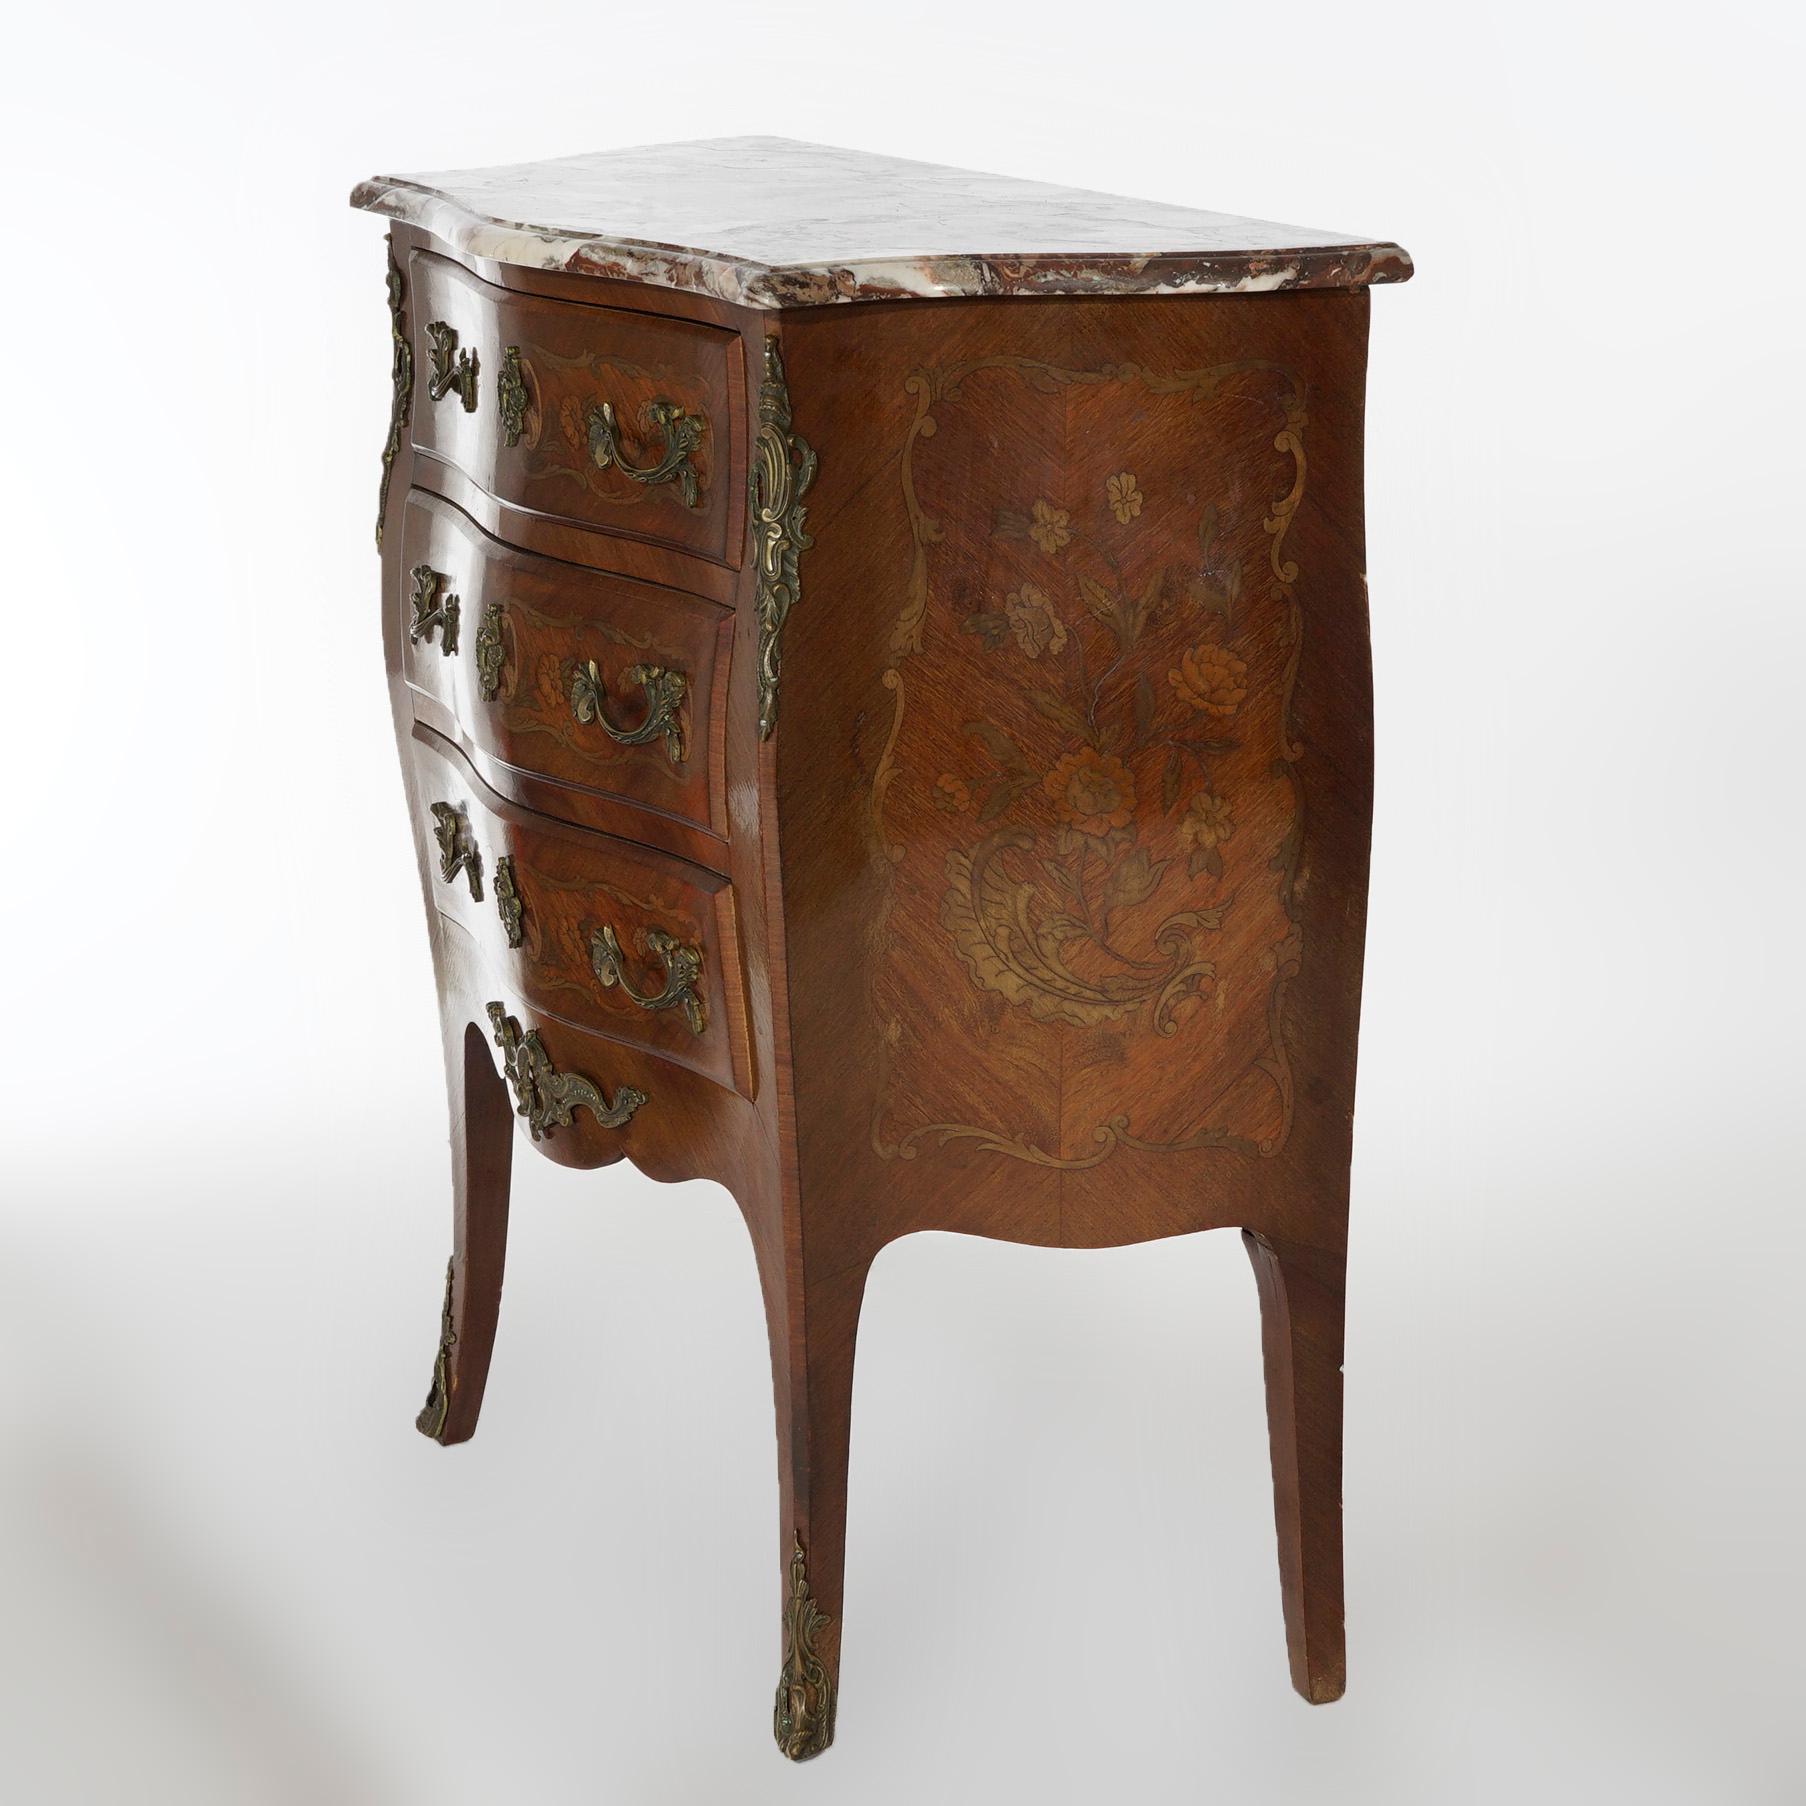 20th Century Antique French Inlaid Kingwood & Rosewood, Marble & Ormolu Bombe Commode c1910